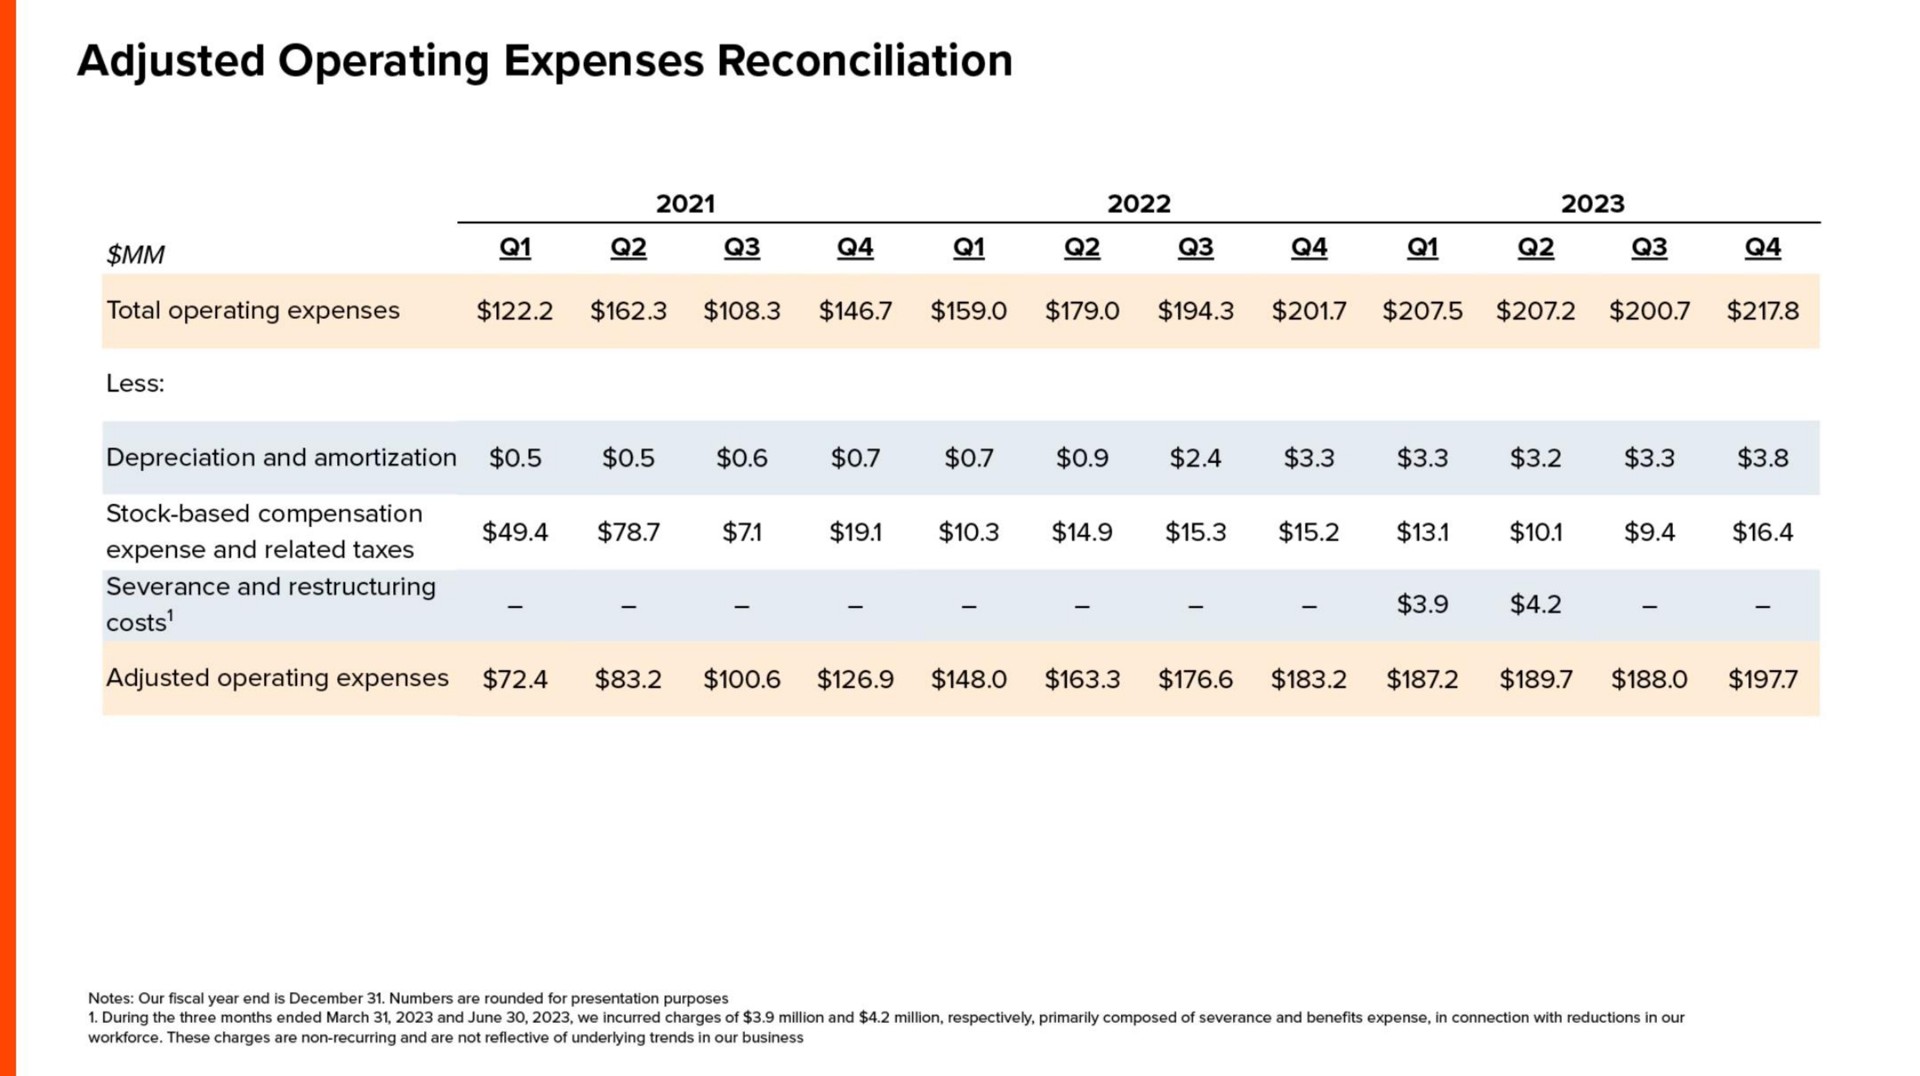 adjusted operating expenses reconciliation total operating expenses depreciation and amortization costs adjusted operating expenses | Reddit